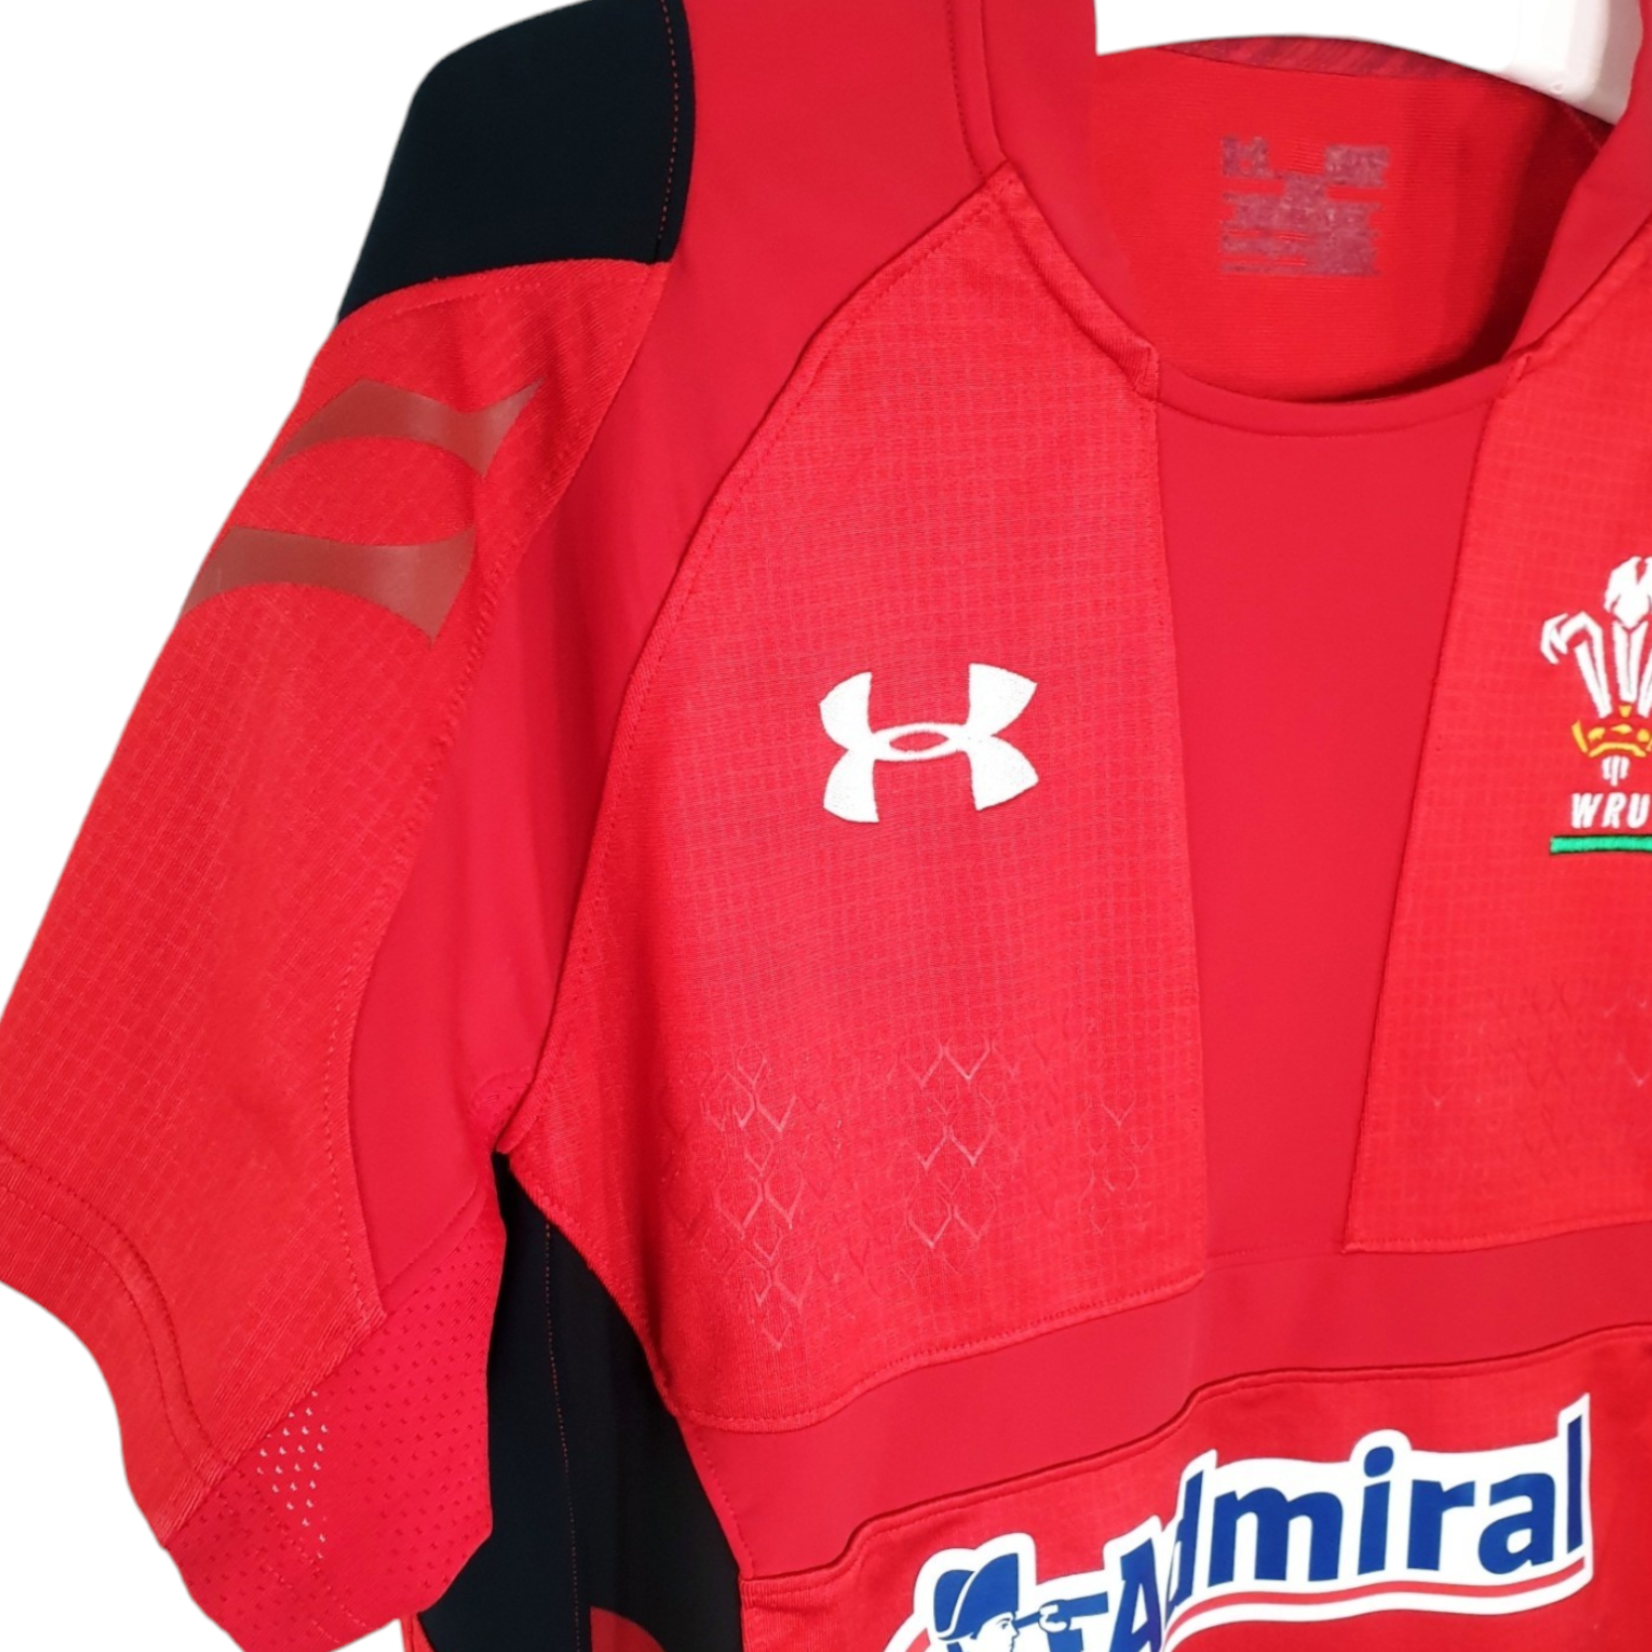 Under Armour Origineel Under Armour vintage rugby shirt Wales 2014/15